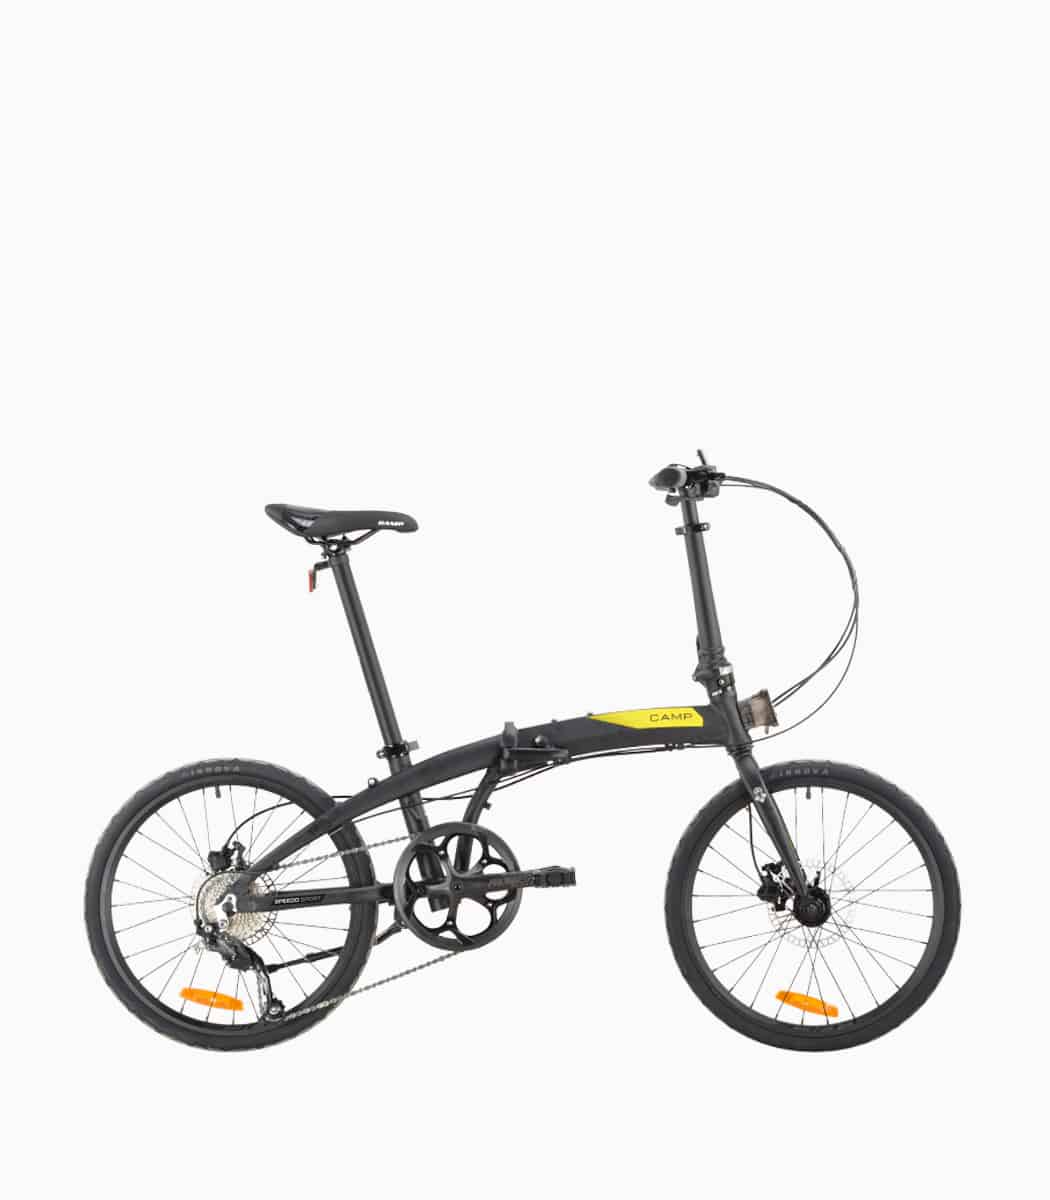 CAMP Speedo Sport (BLACK) foldable bicycle right